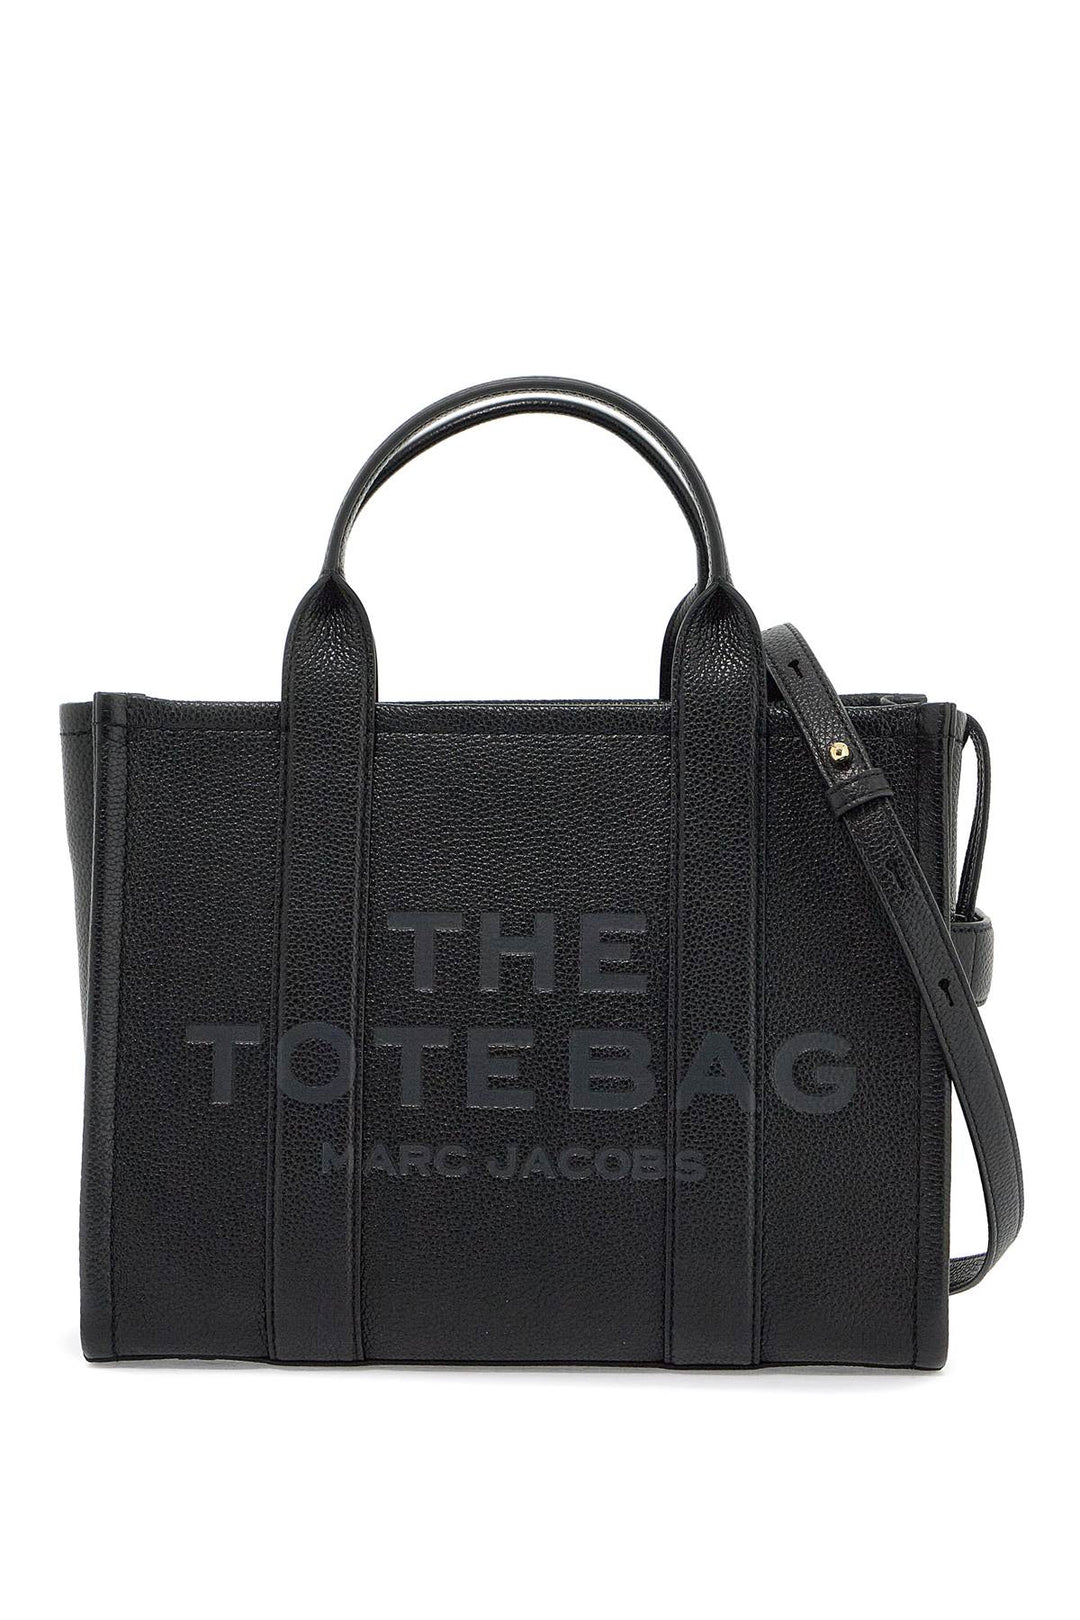 Marc Jacobs The Leather Medium Tote Bag   Black